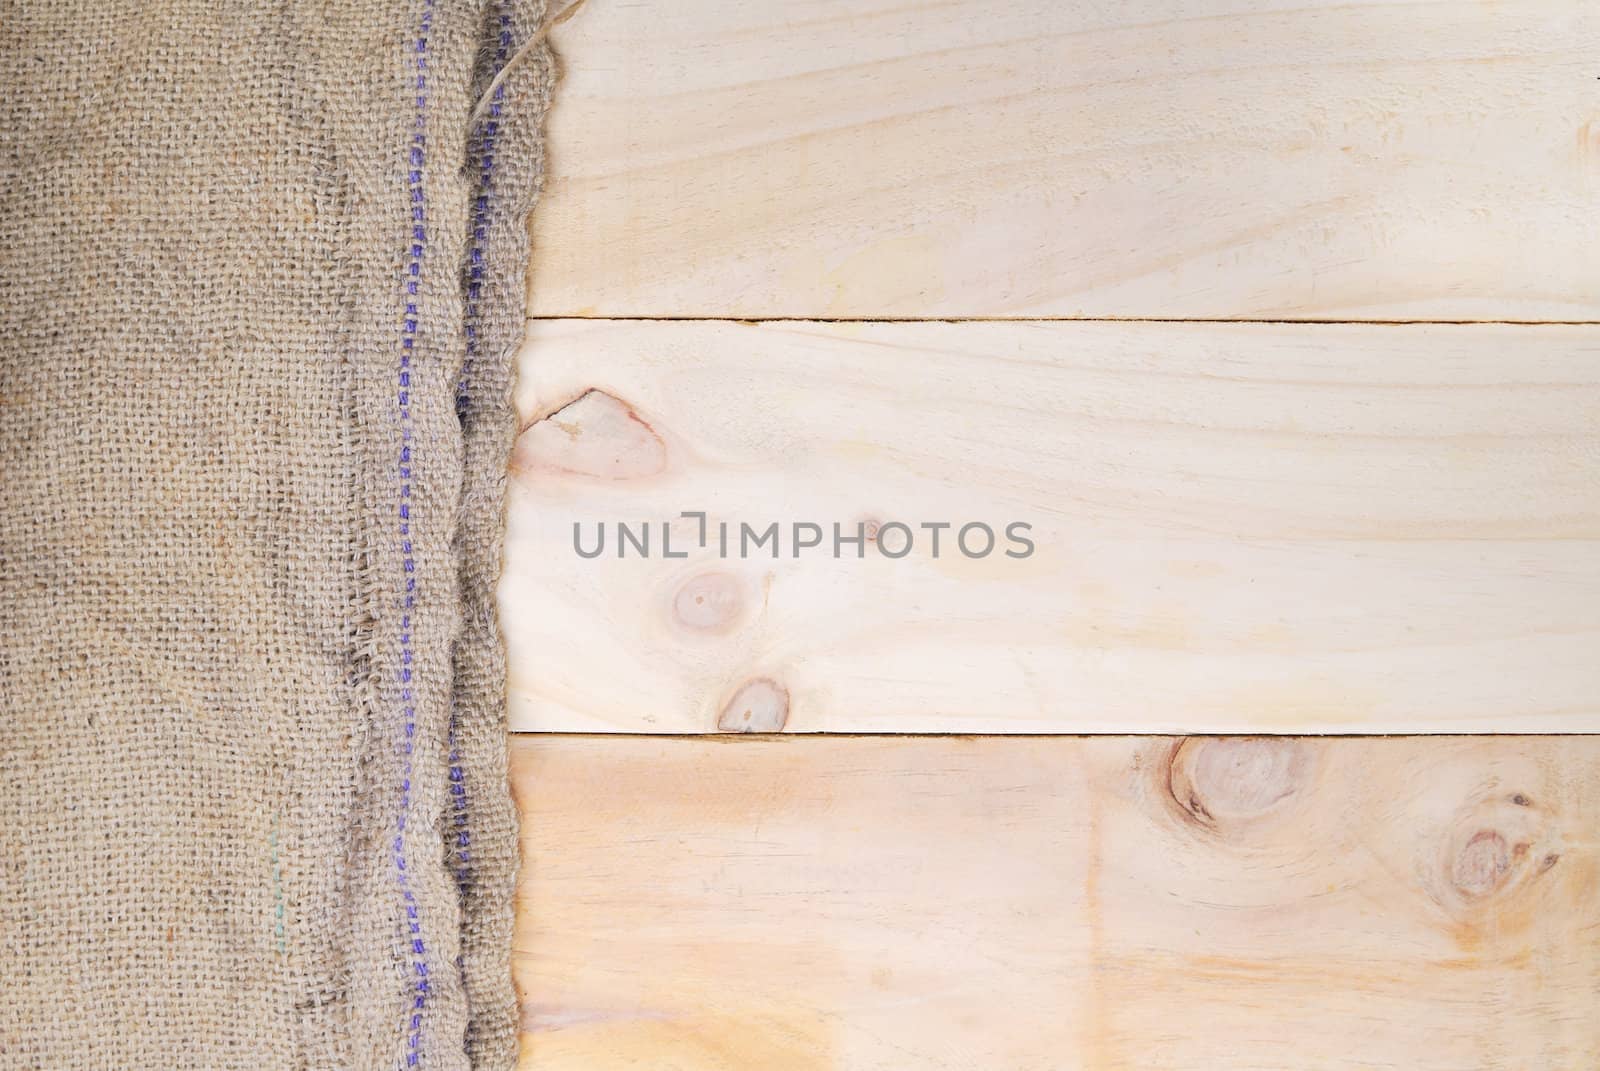 Gunny sack texture and wood plank table background by teen00000